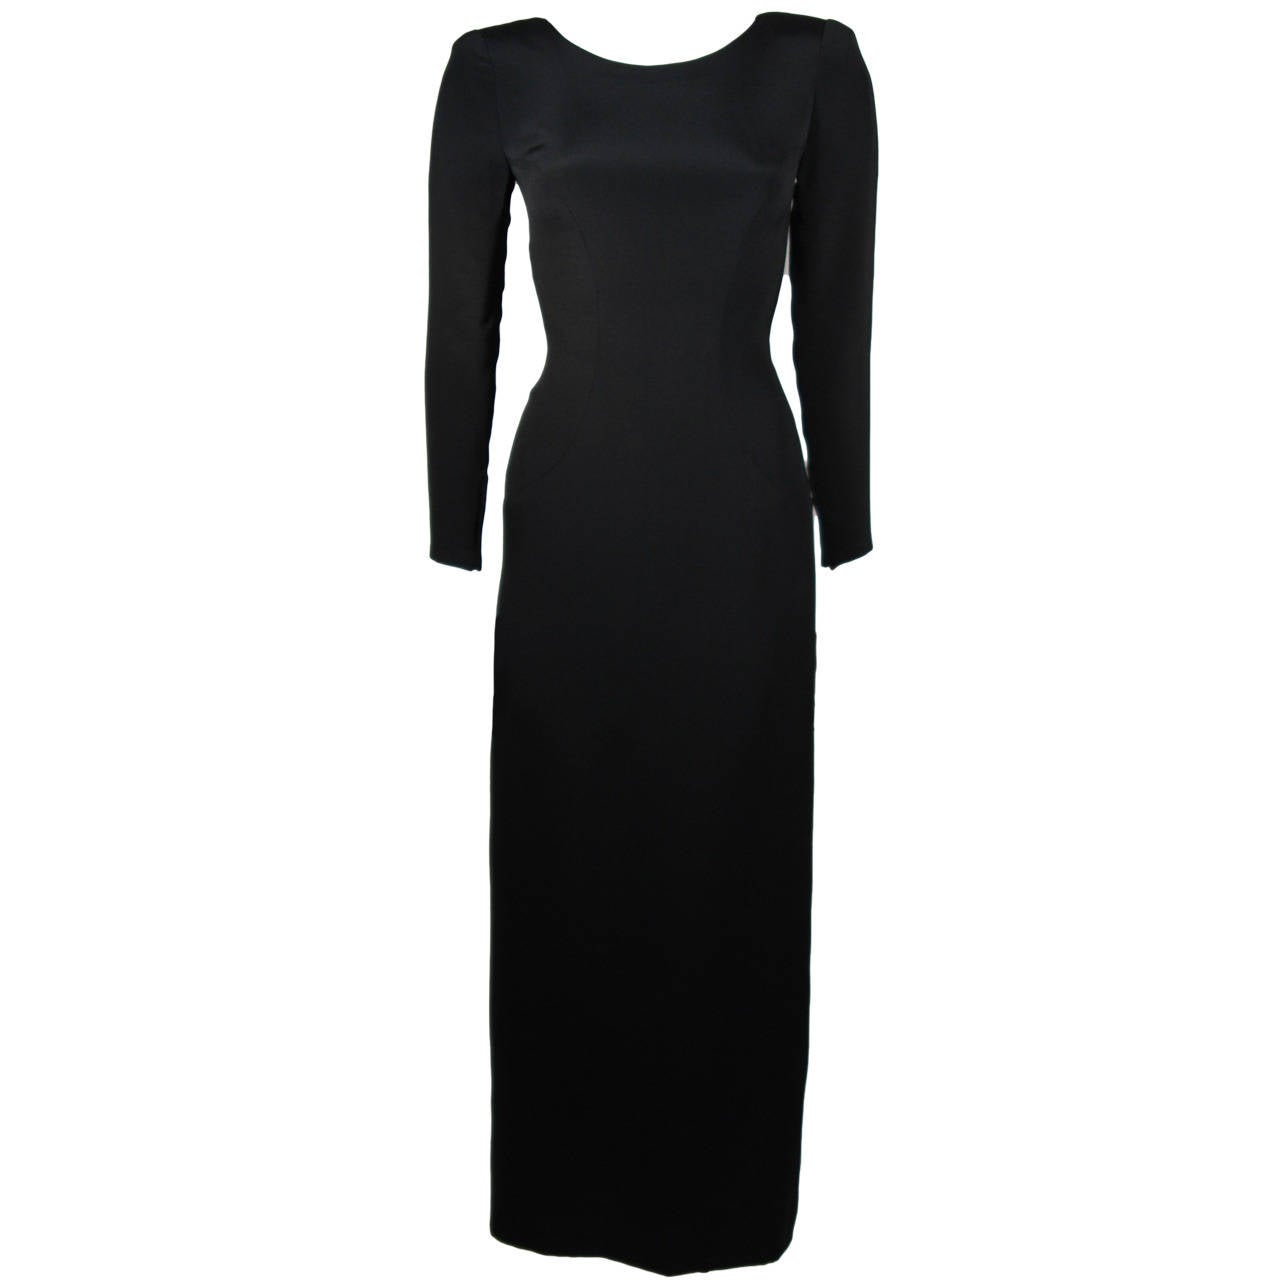 Chanel Haute Couture Black Silk Long Sleeve Gown Size 2-4 EU 34